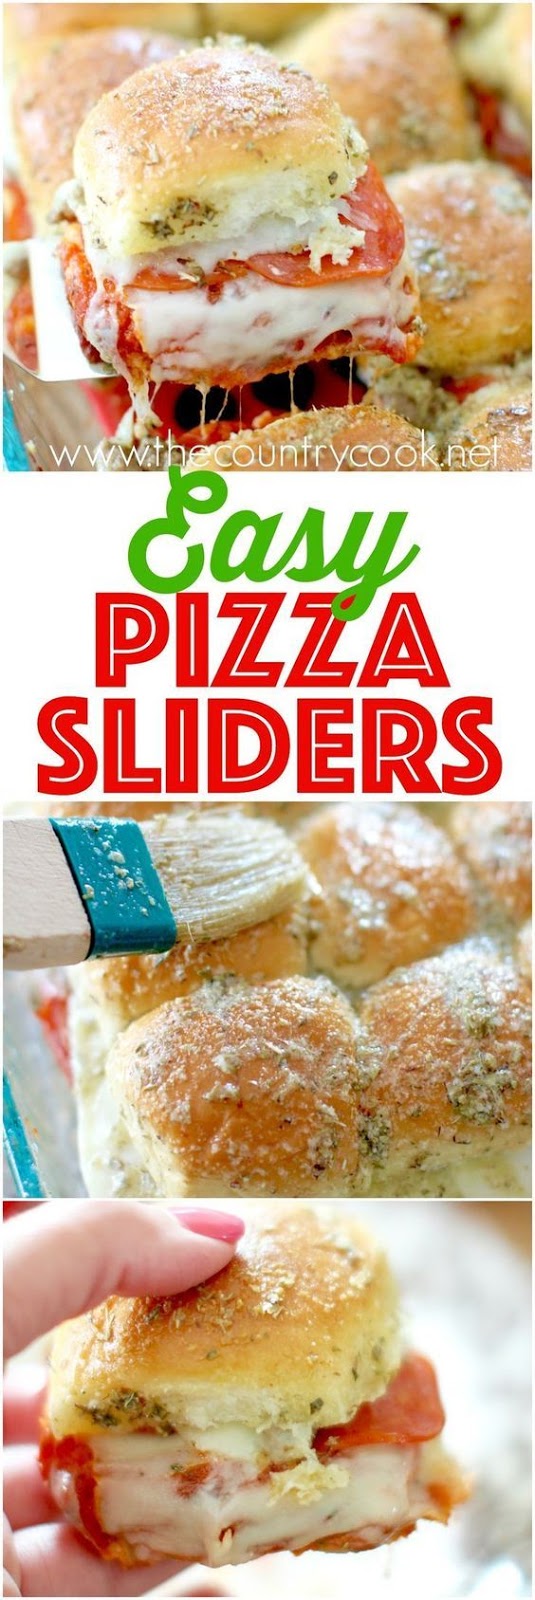 Remix pizza night by serving pizza sliders instead! Pizza Pull Apart Sliders are stuffed with cheese, pepperoni, sausage. Top with a savory buttery spread!